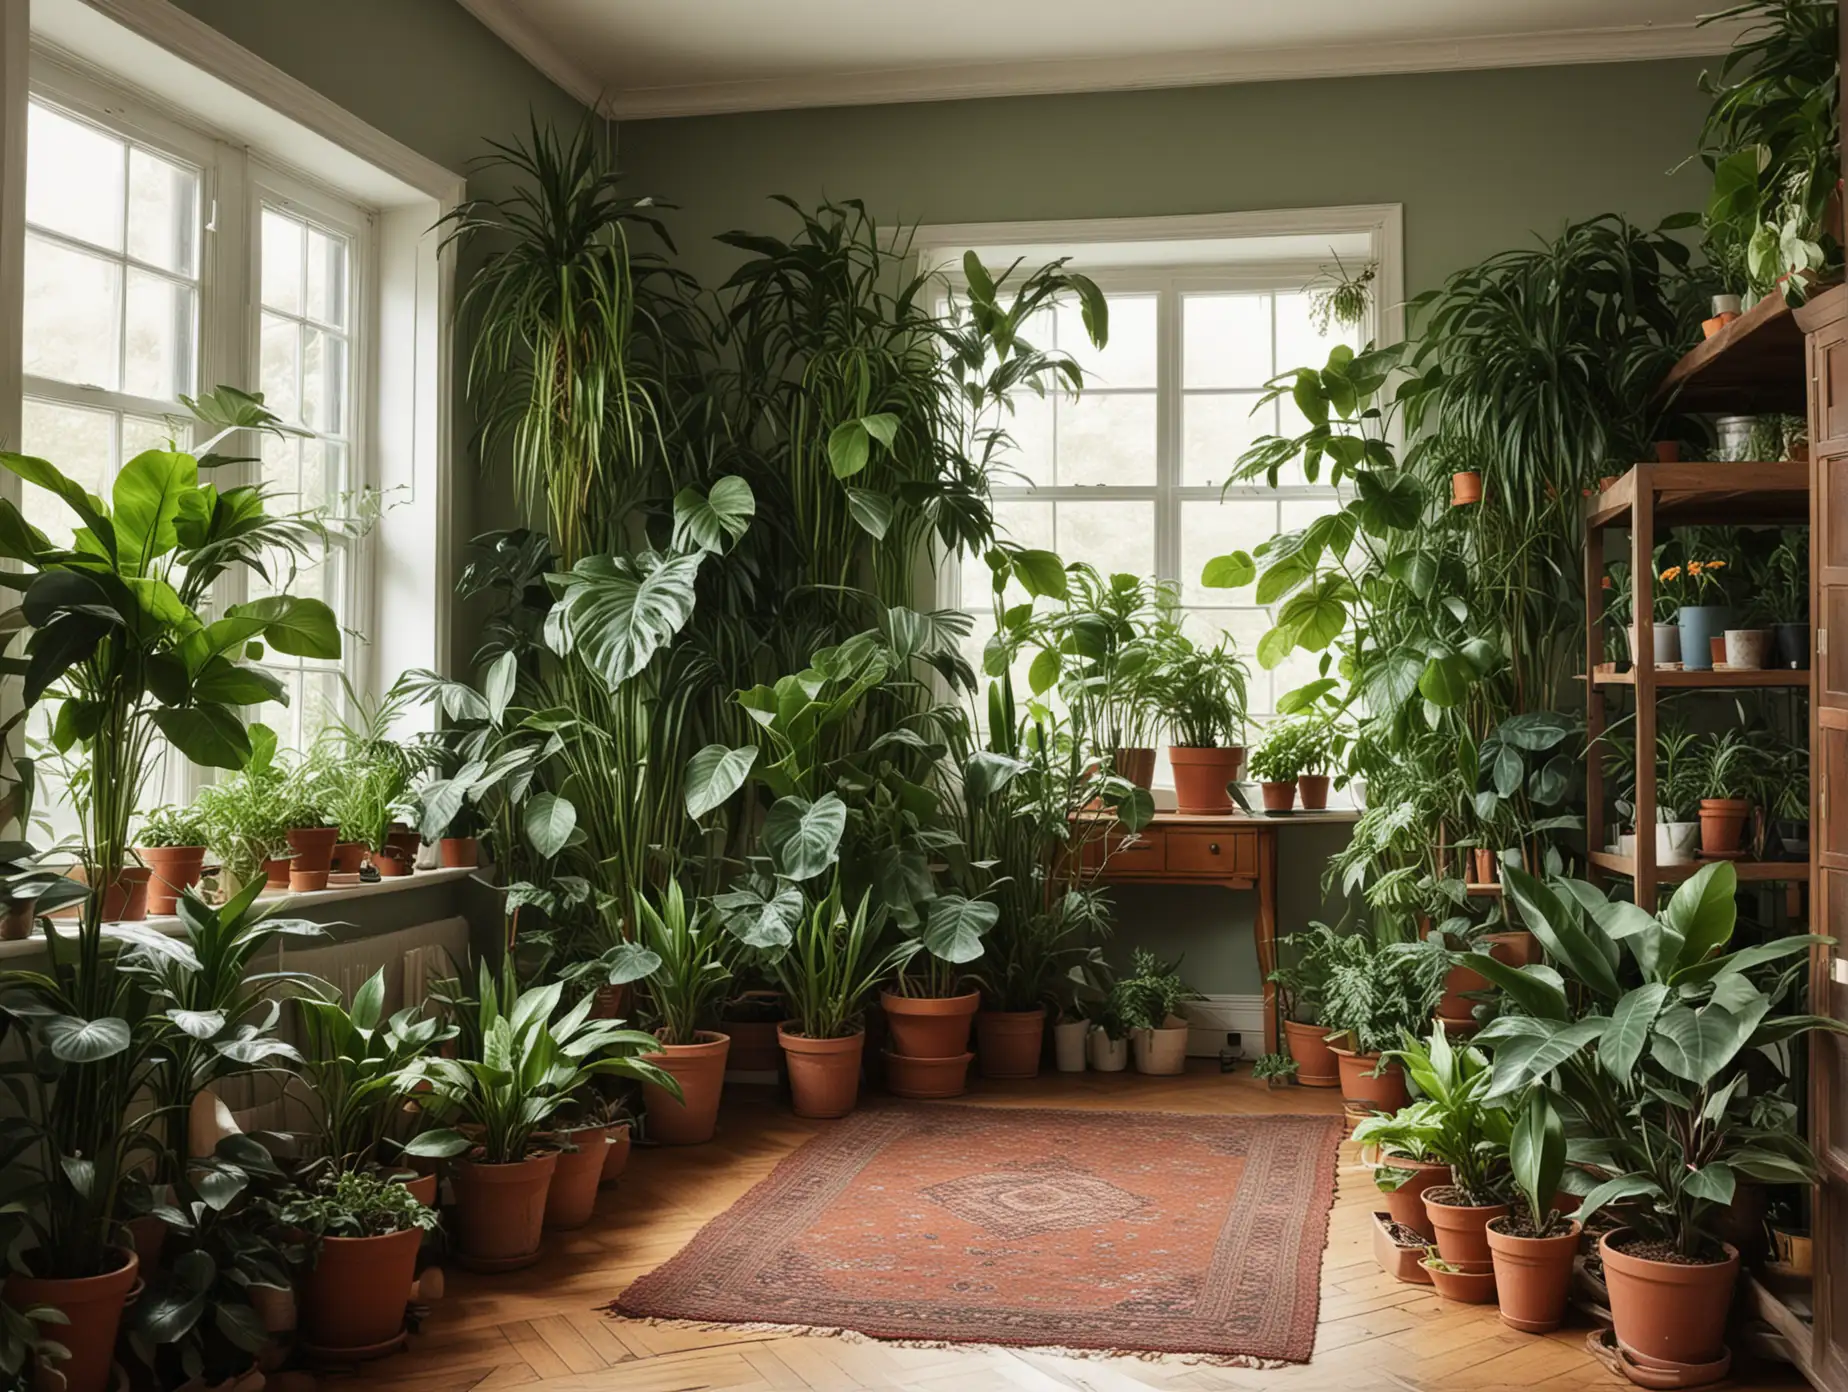 Lush Indoor Jungle Vibrant Room Filled with Diverse Houseplants